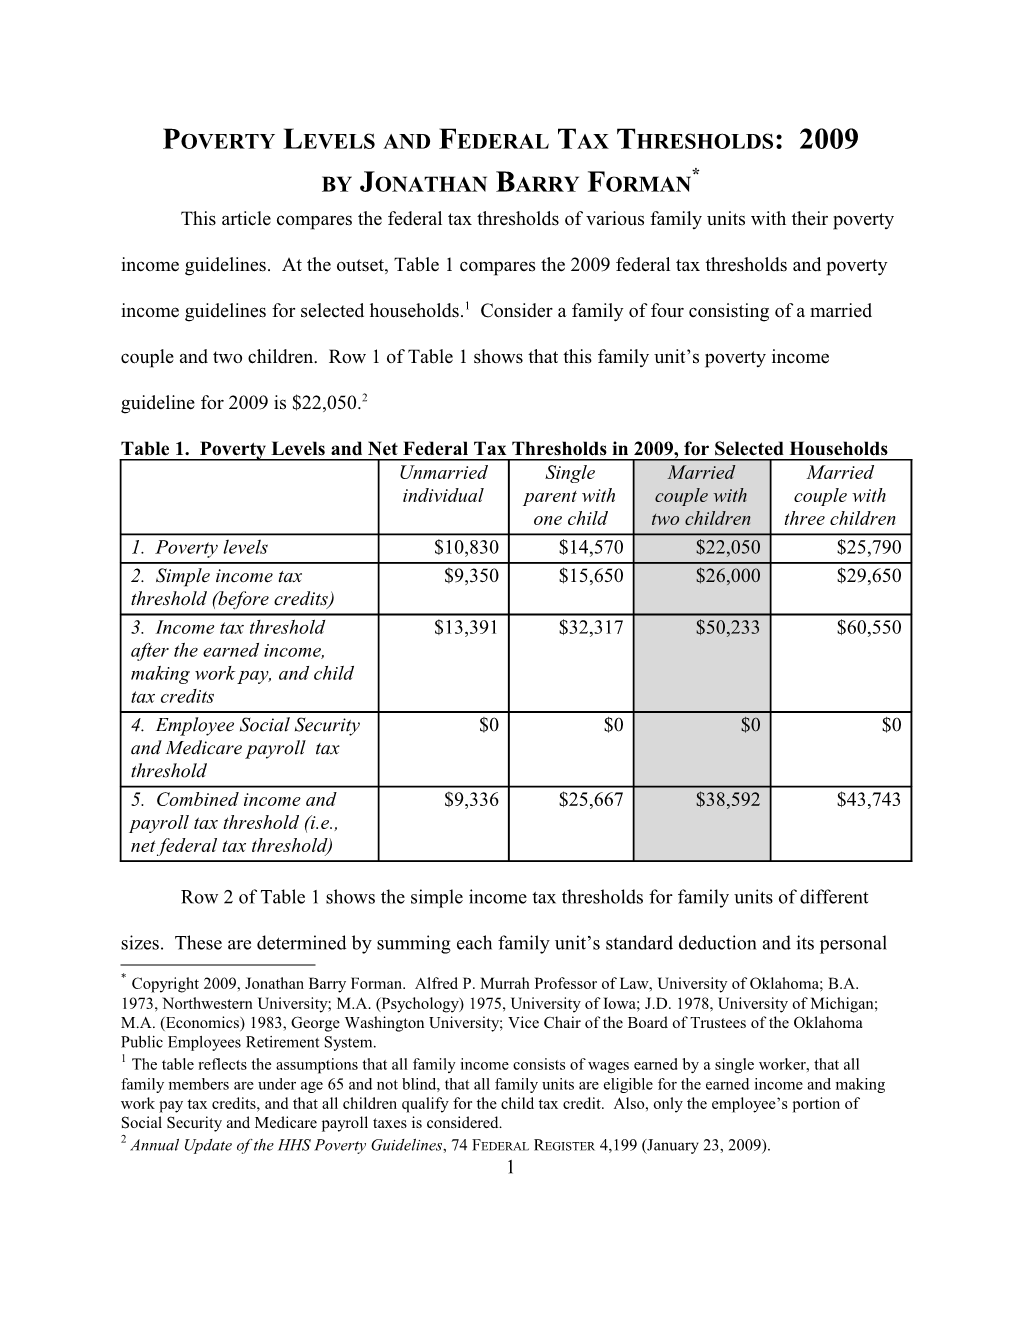 Poverty Levels and Federal Tax Thresholds: 2009